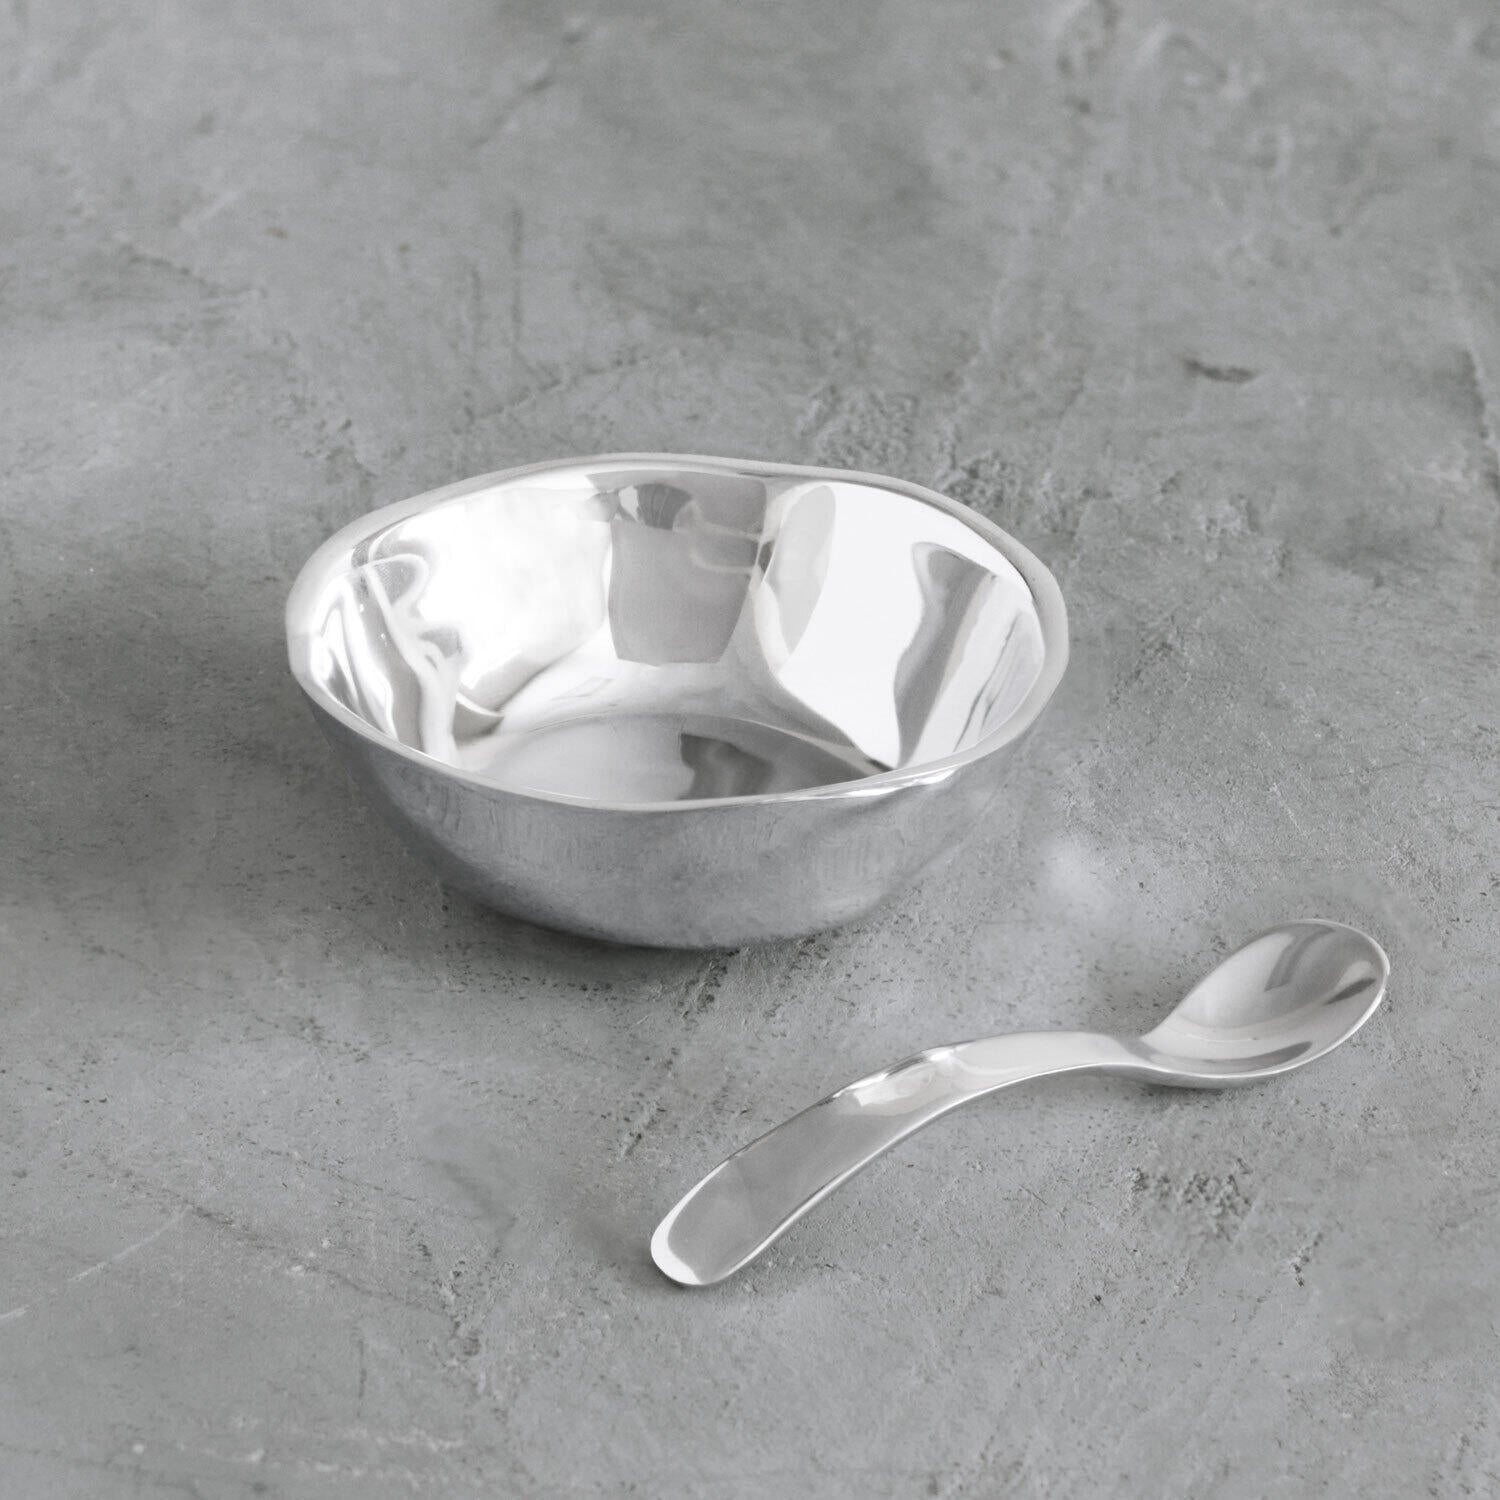 GIFTABLES Soho Round Bowl with Spoon